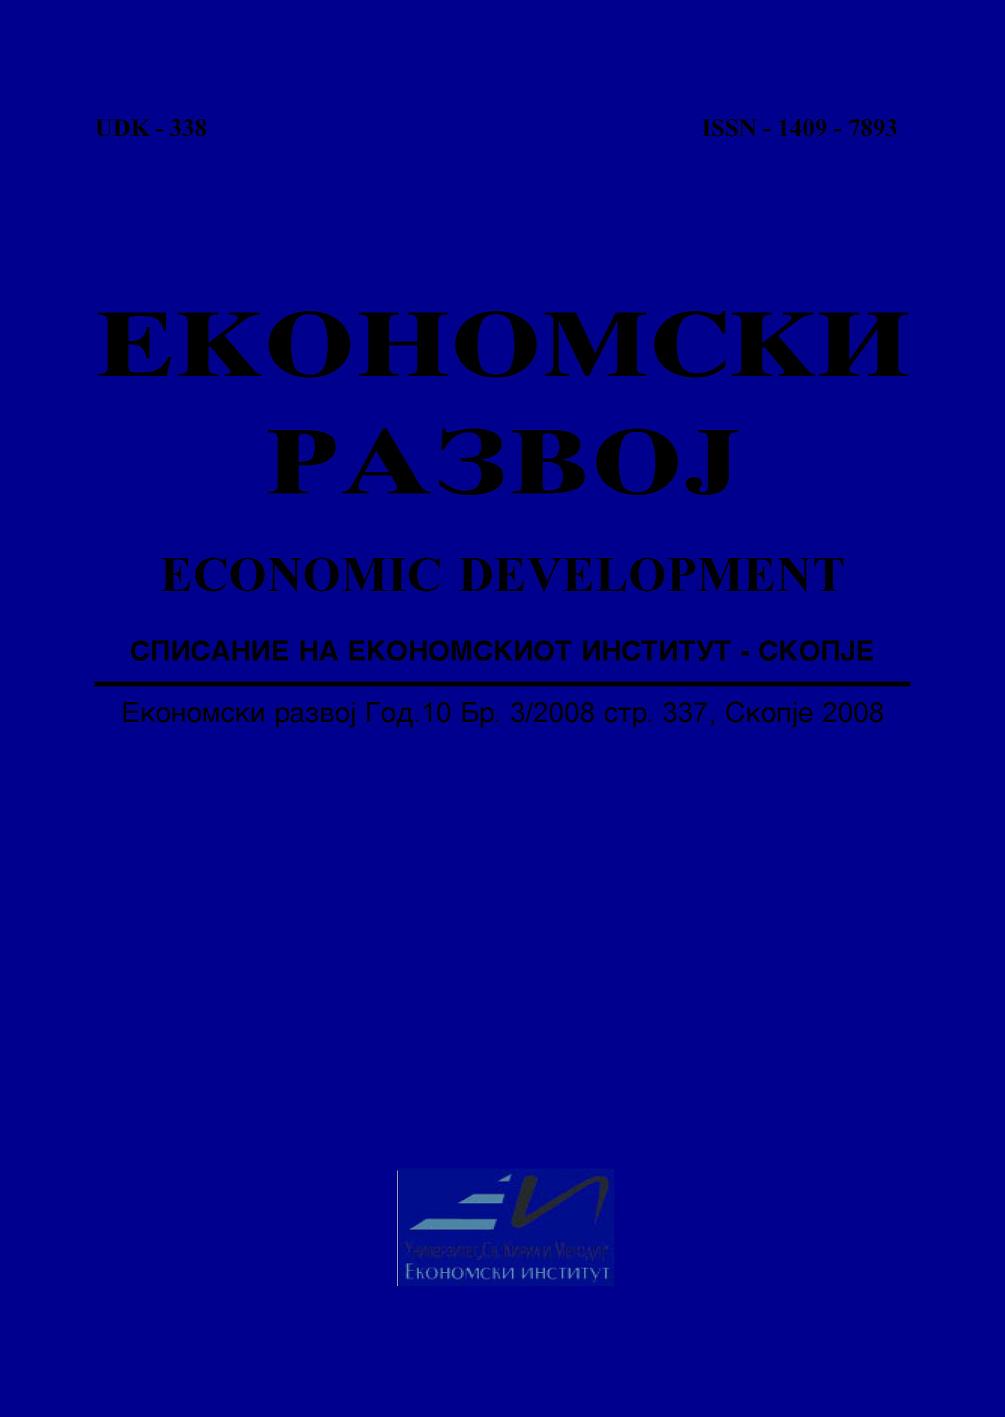 INFORMATION SYSTEMS AS FACTOR FOR EXPORT EXPANSION    -IN FUNCTION OF DEVELOPMENT OF REPUBLIC OF MACEDONIA Cover Image